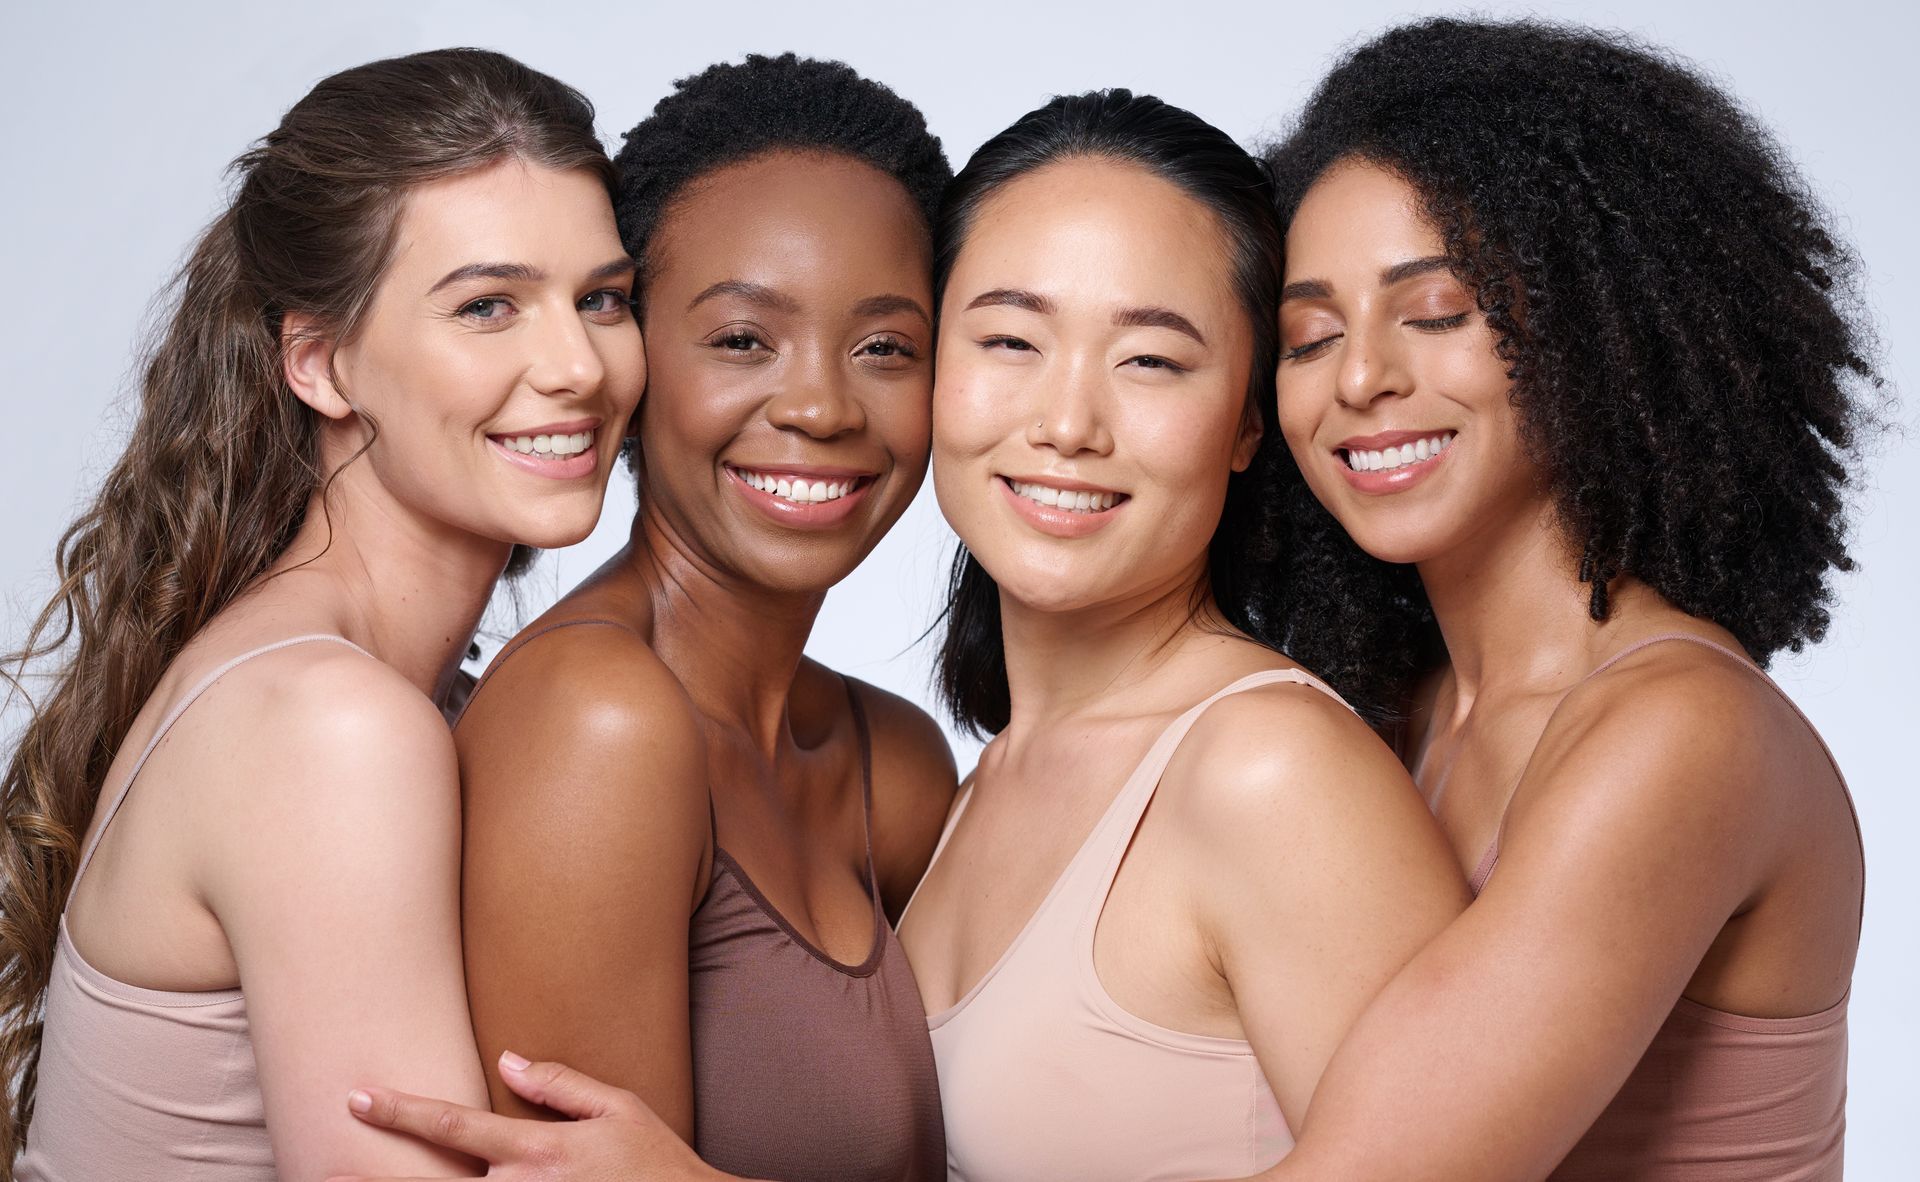 multicultural women smiling in neutral clothing